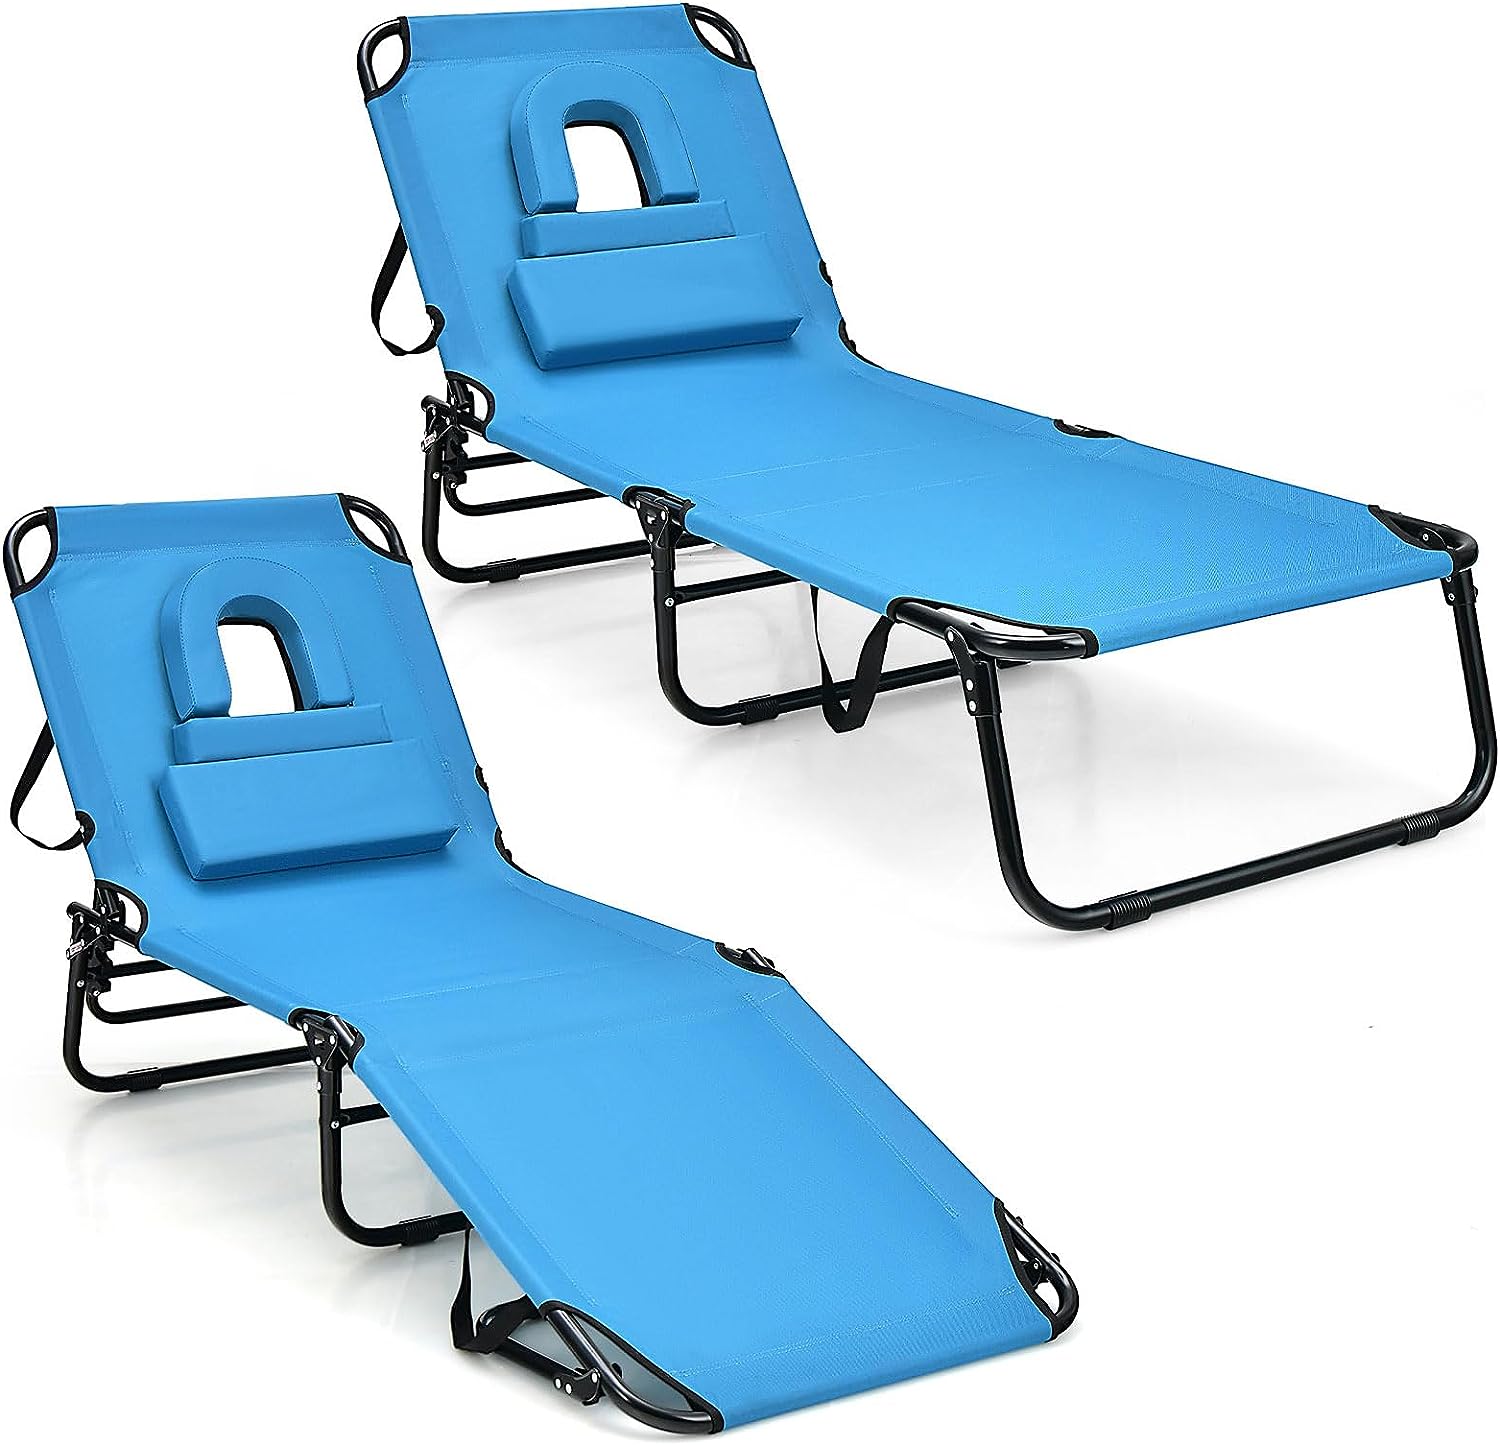 Giantex Folding Beach Tanning Chair - Adjustable Patio Lounge Chair w/Face Hole, Removable Pillows, Carry Strap